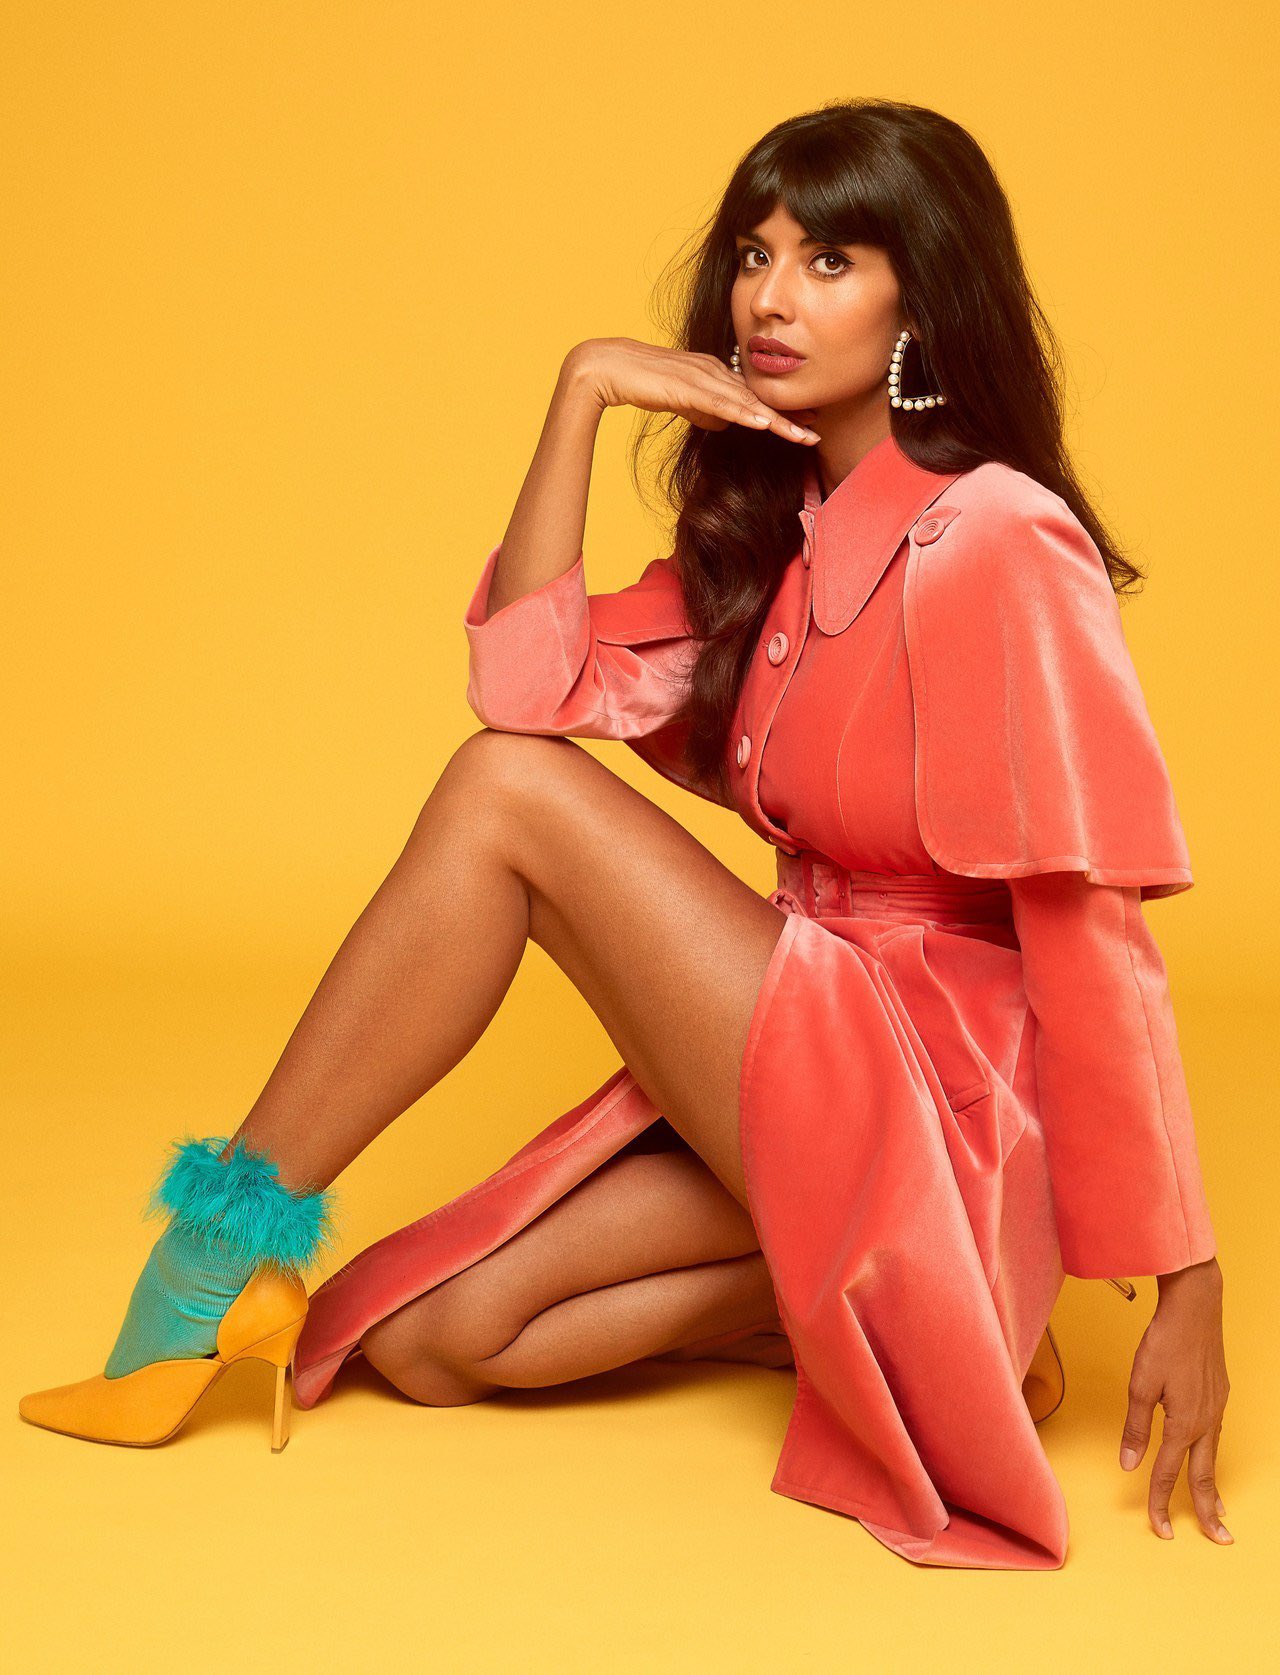 Beta For Babes On Twitter Jameela Jamil Looks Like Such A Queen You